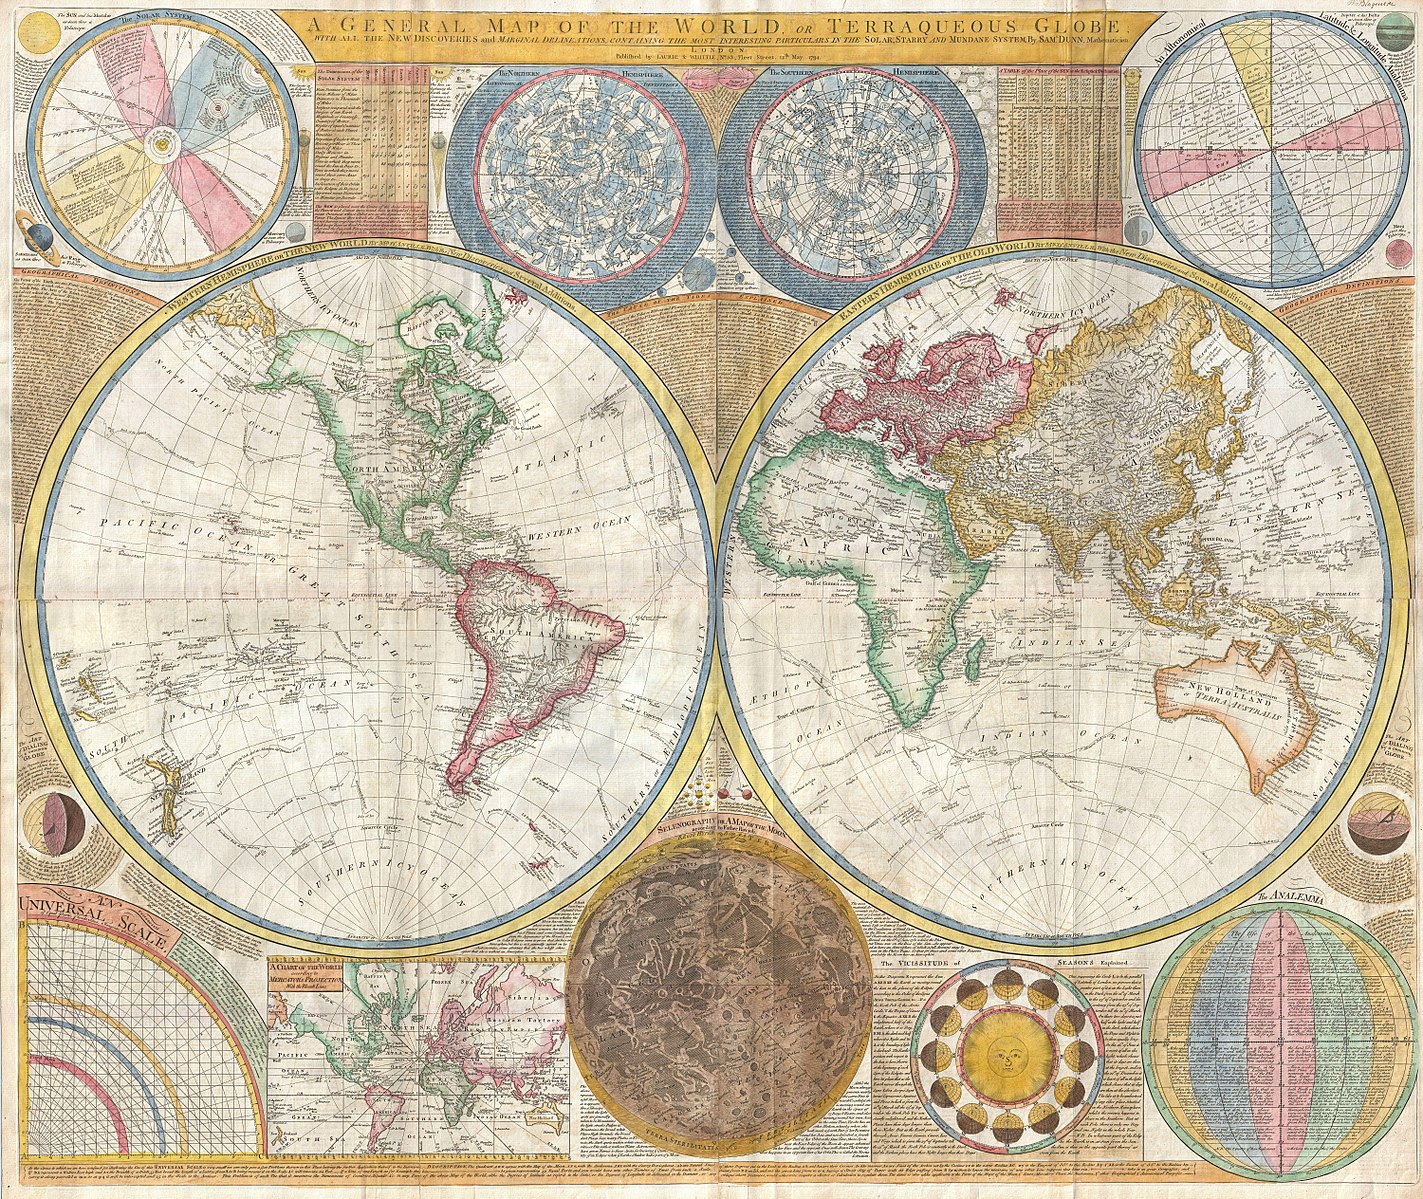 Map of the world in 1794 according to European Navigators